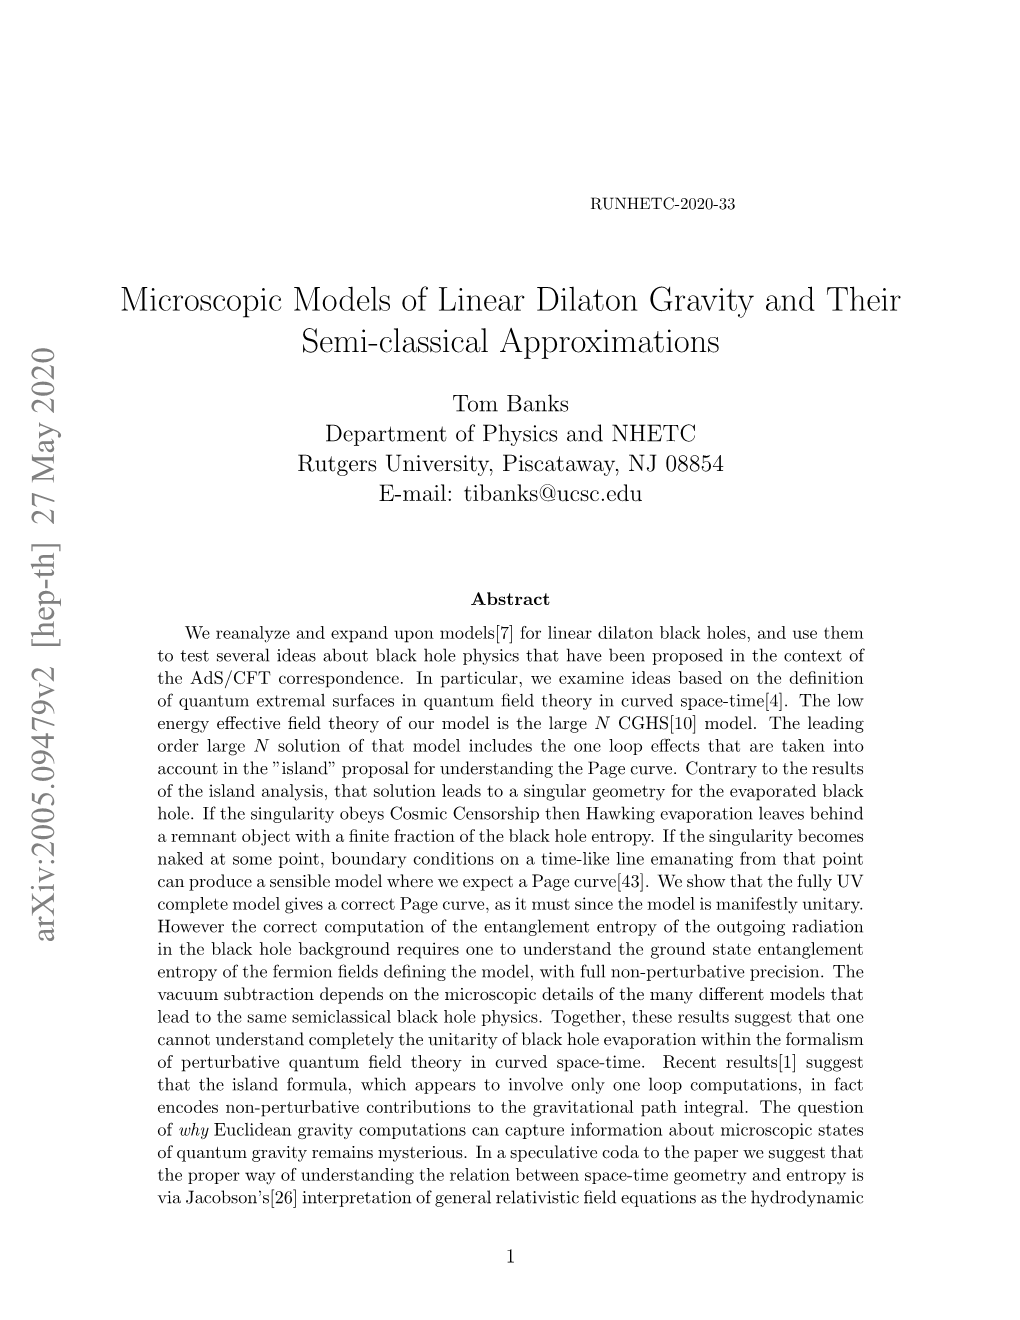 Microscopic Models of Linear Dilaton Gravity and Their Semi-Classical Approximations